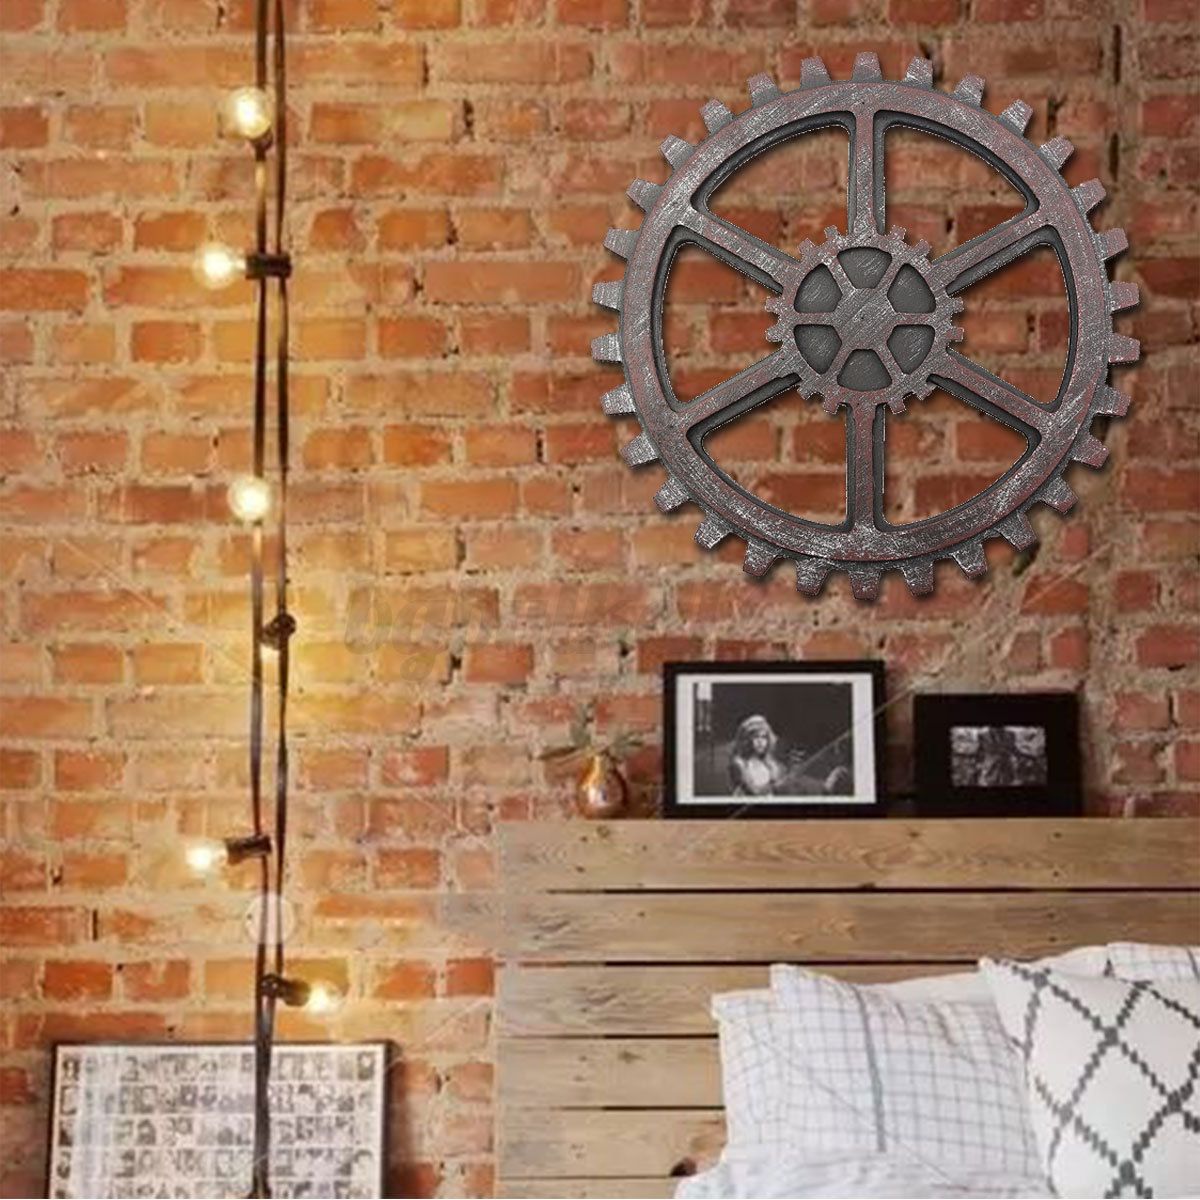 Wooden Gear Wall Art Industrial Antique Vintage Chic Throughout Retro Wood Wall Art (View 2 of 15)